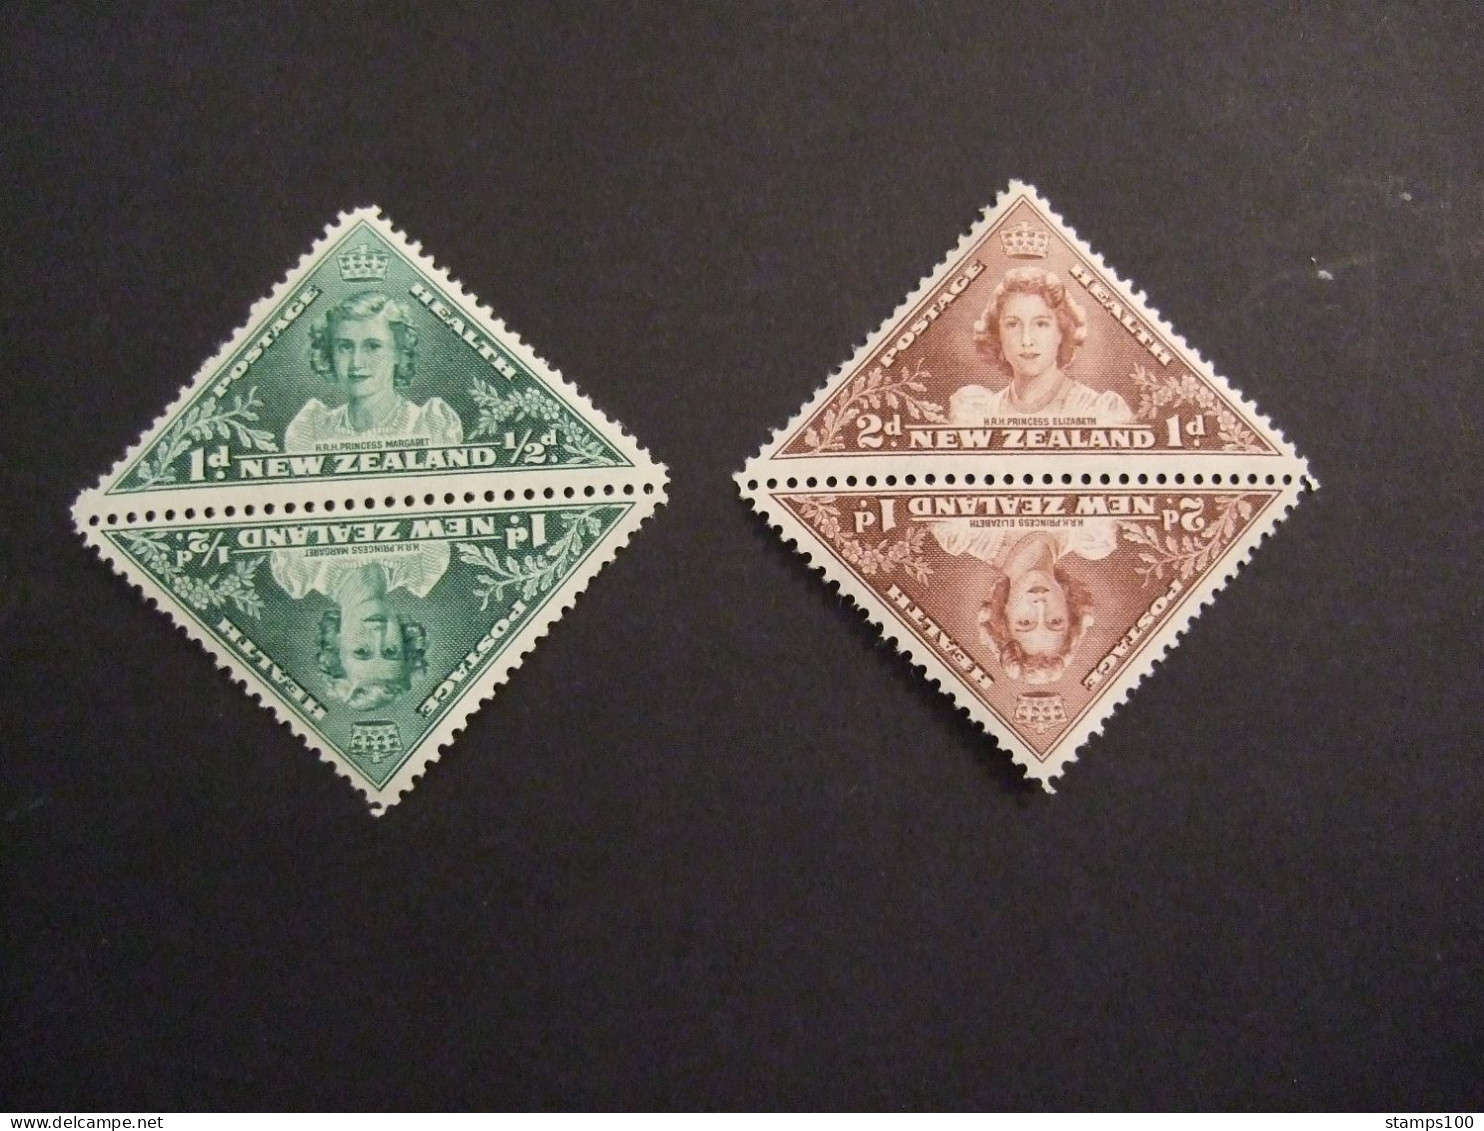 NEW ZEALAND - 1943 HEALTH STAMPS SET MINT NH** SG 636/37  (A13-TVN-01) - Nuevos